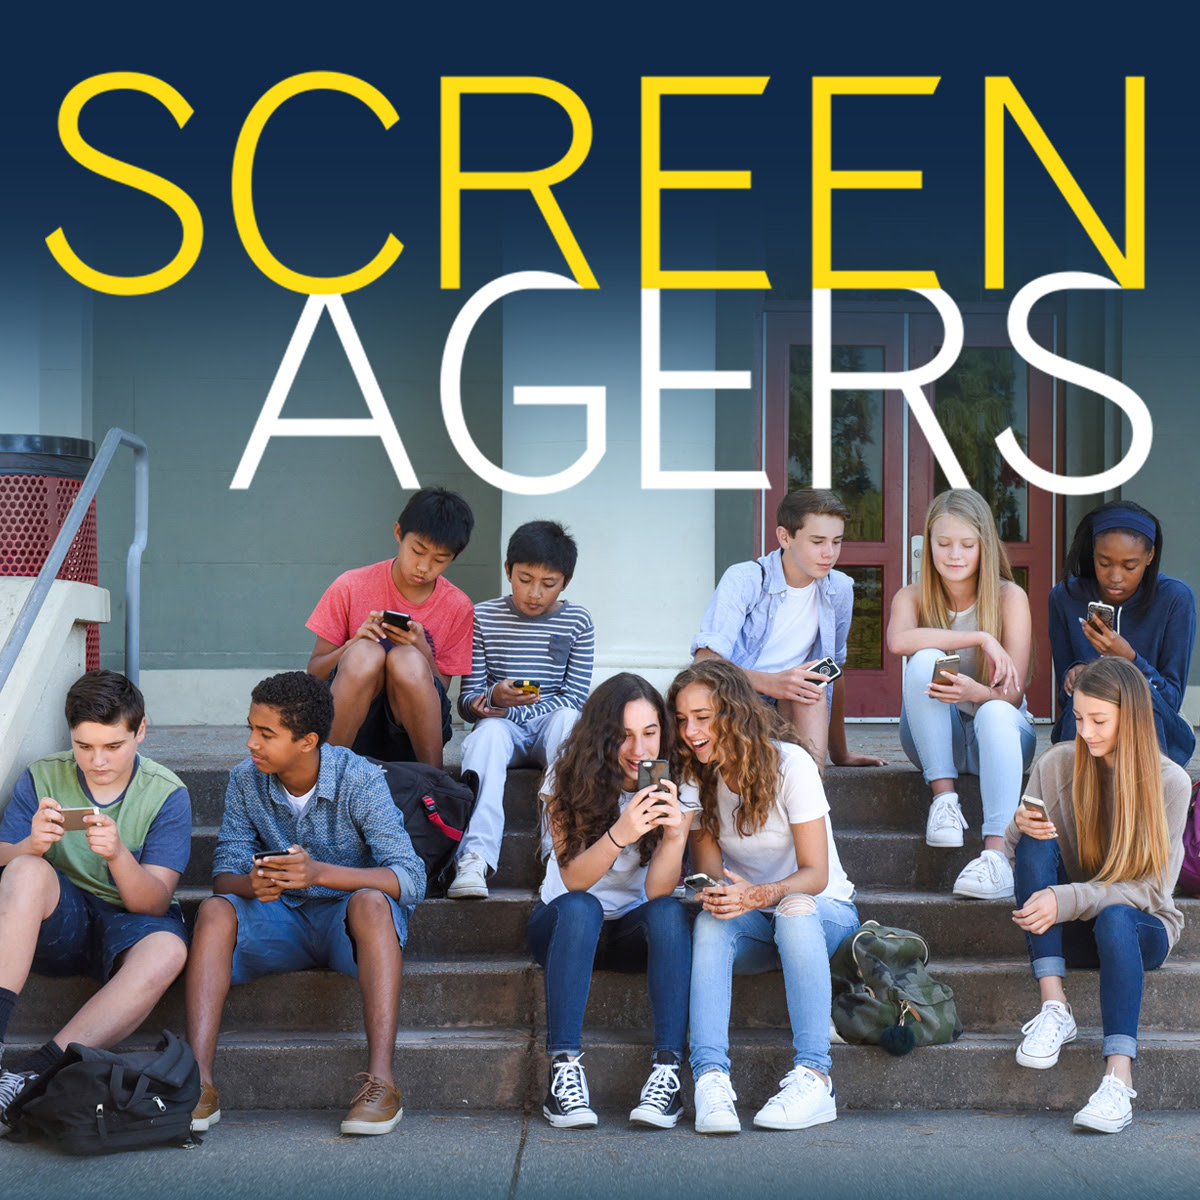 Screenagers Film Presented By Barnstable Academy